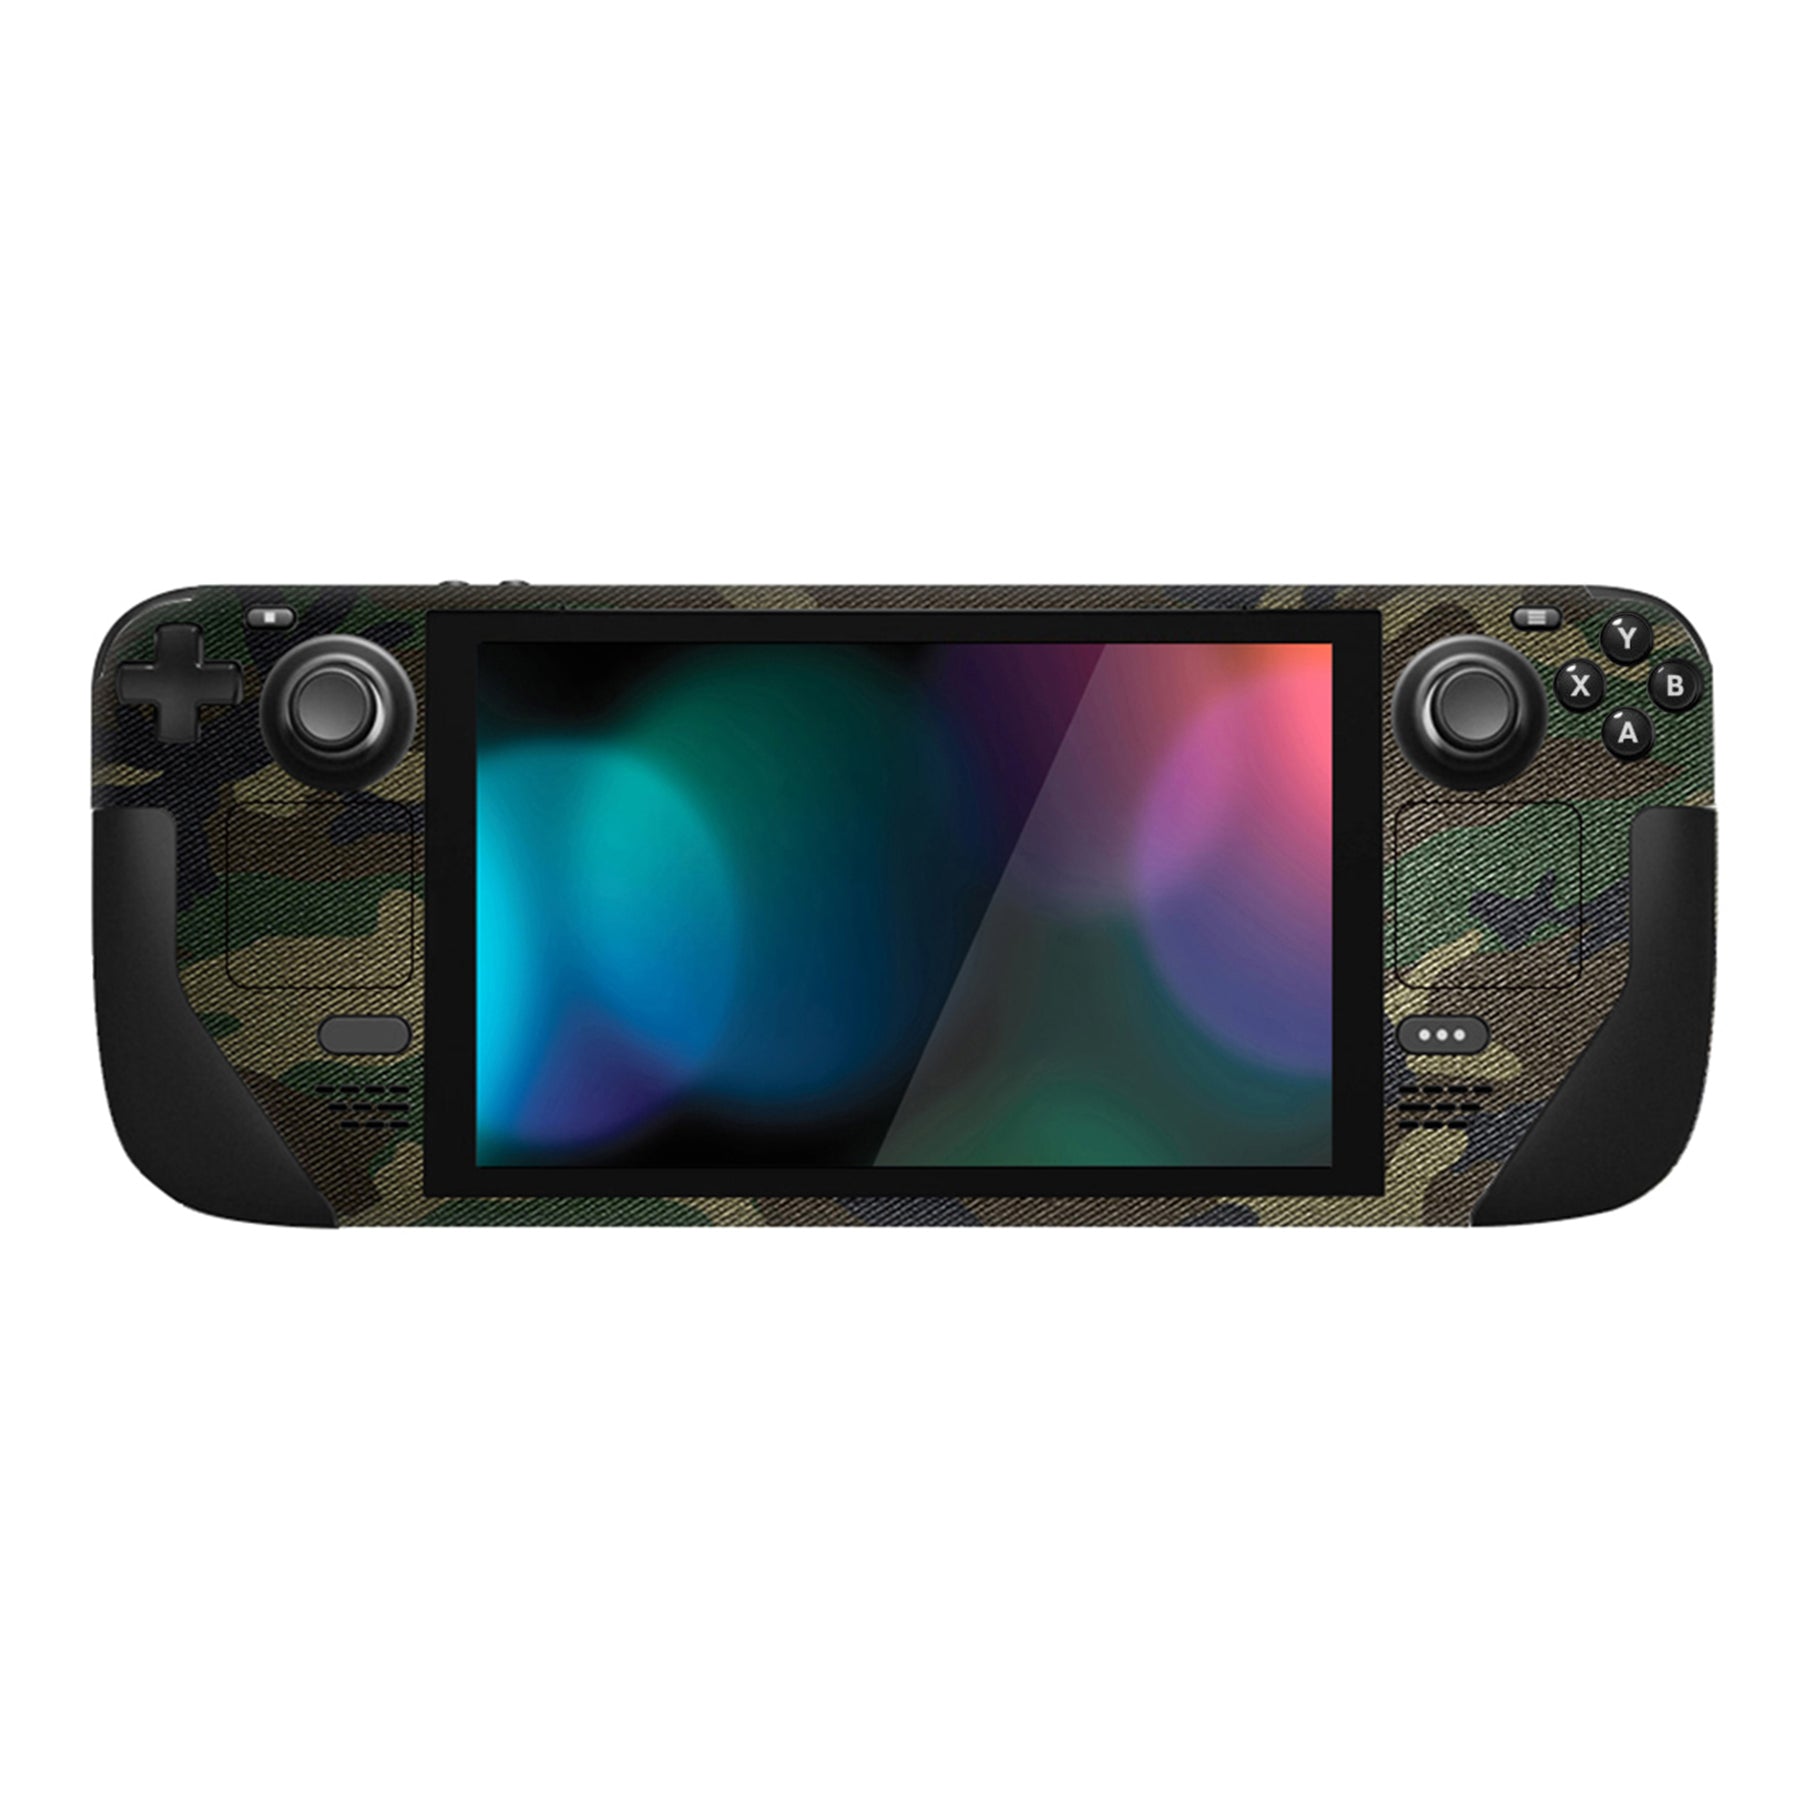 PlayVital Full Set Protective Skin Decal for Steam Deck, Custom Stickers Vinyl Cover for Steam Deck Handheld Gaming PC - Army Green Camouflage - SDTM015 playvital